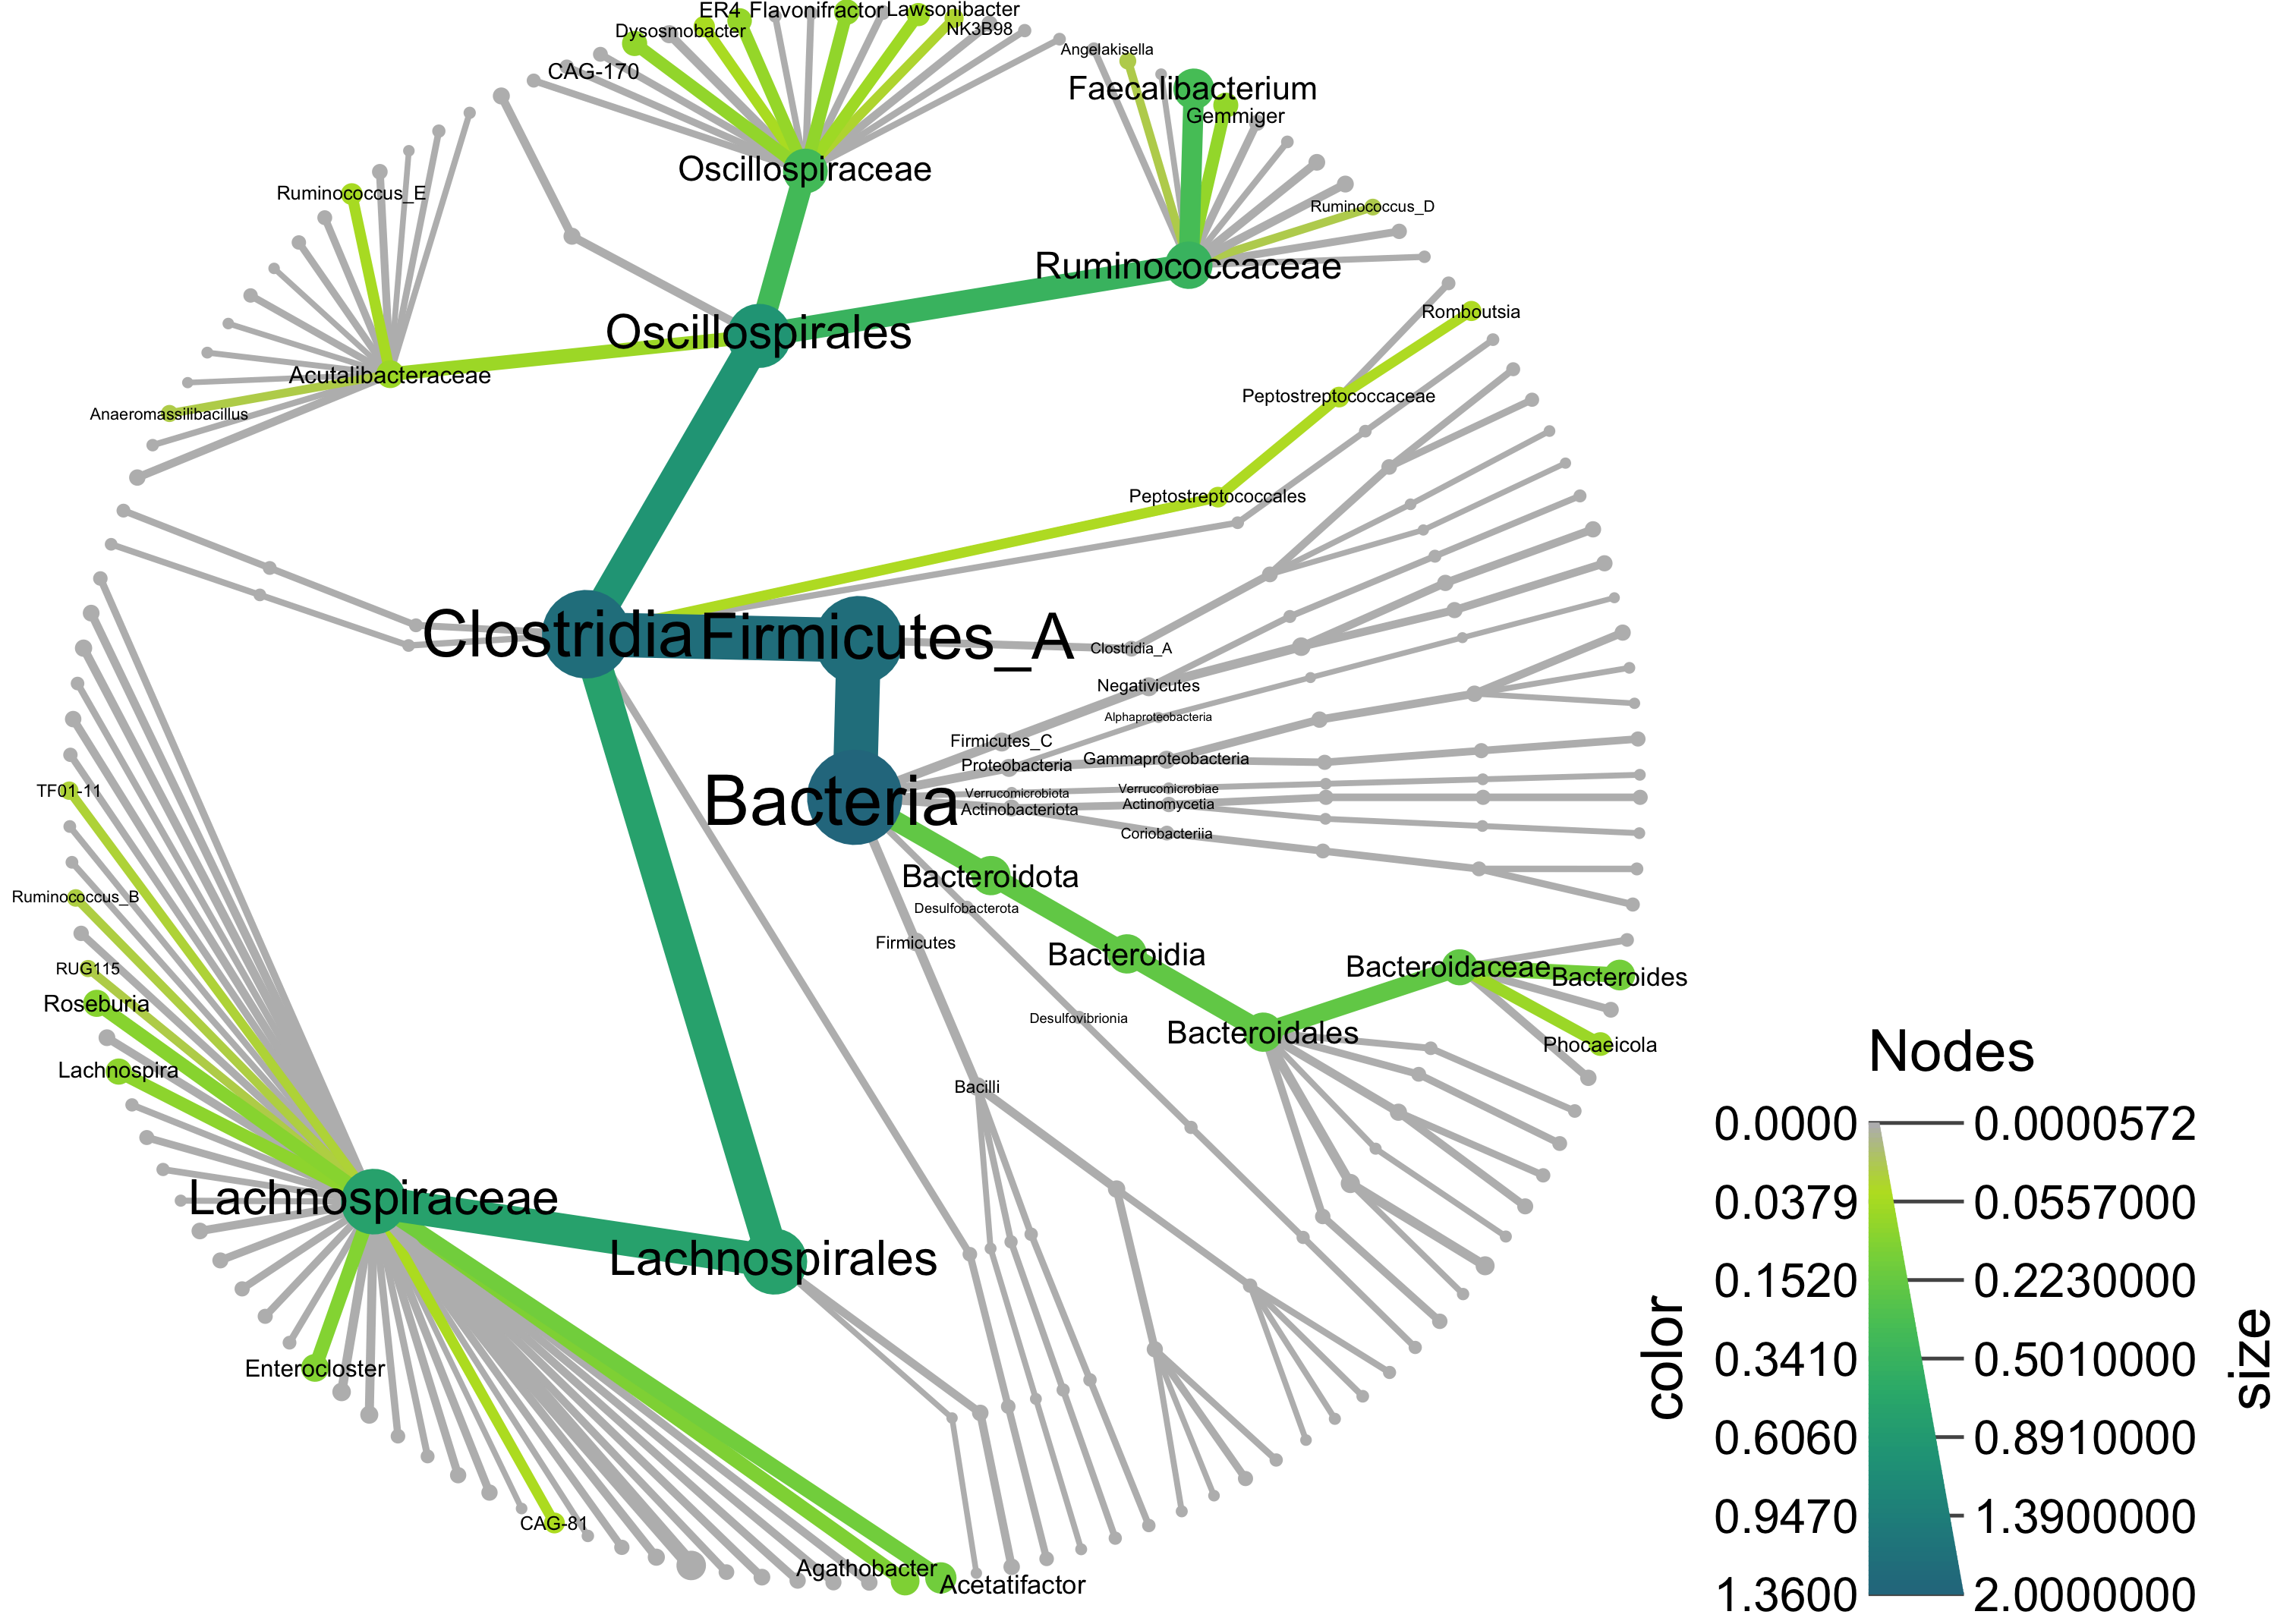 Figure 3: Tree of bacterial species that were predictive of IBD subtype in all models. Nodes are summarized to the genus level. All taxa up to the class level are labelled. Taxa that could account for at least 1% of the normalized variable importance across random forests models are colored and labelled. Node size and node color reflect potential normalized variable importance attributable to each taxonomic lineage with larger node sizes and darker color representing larger variable importance; while normalized variable importance across models sums to one, some sequences are shared across genomes making the total potential variable importance across all genomes larger than one.